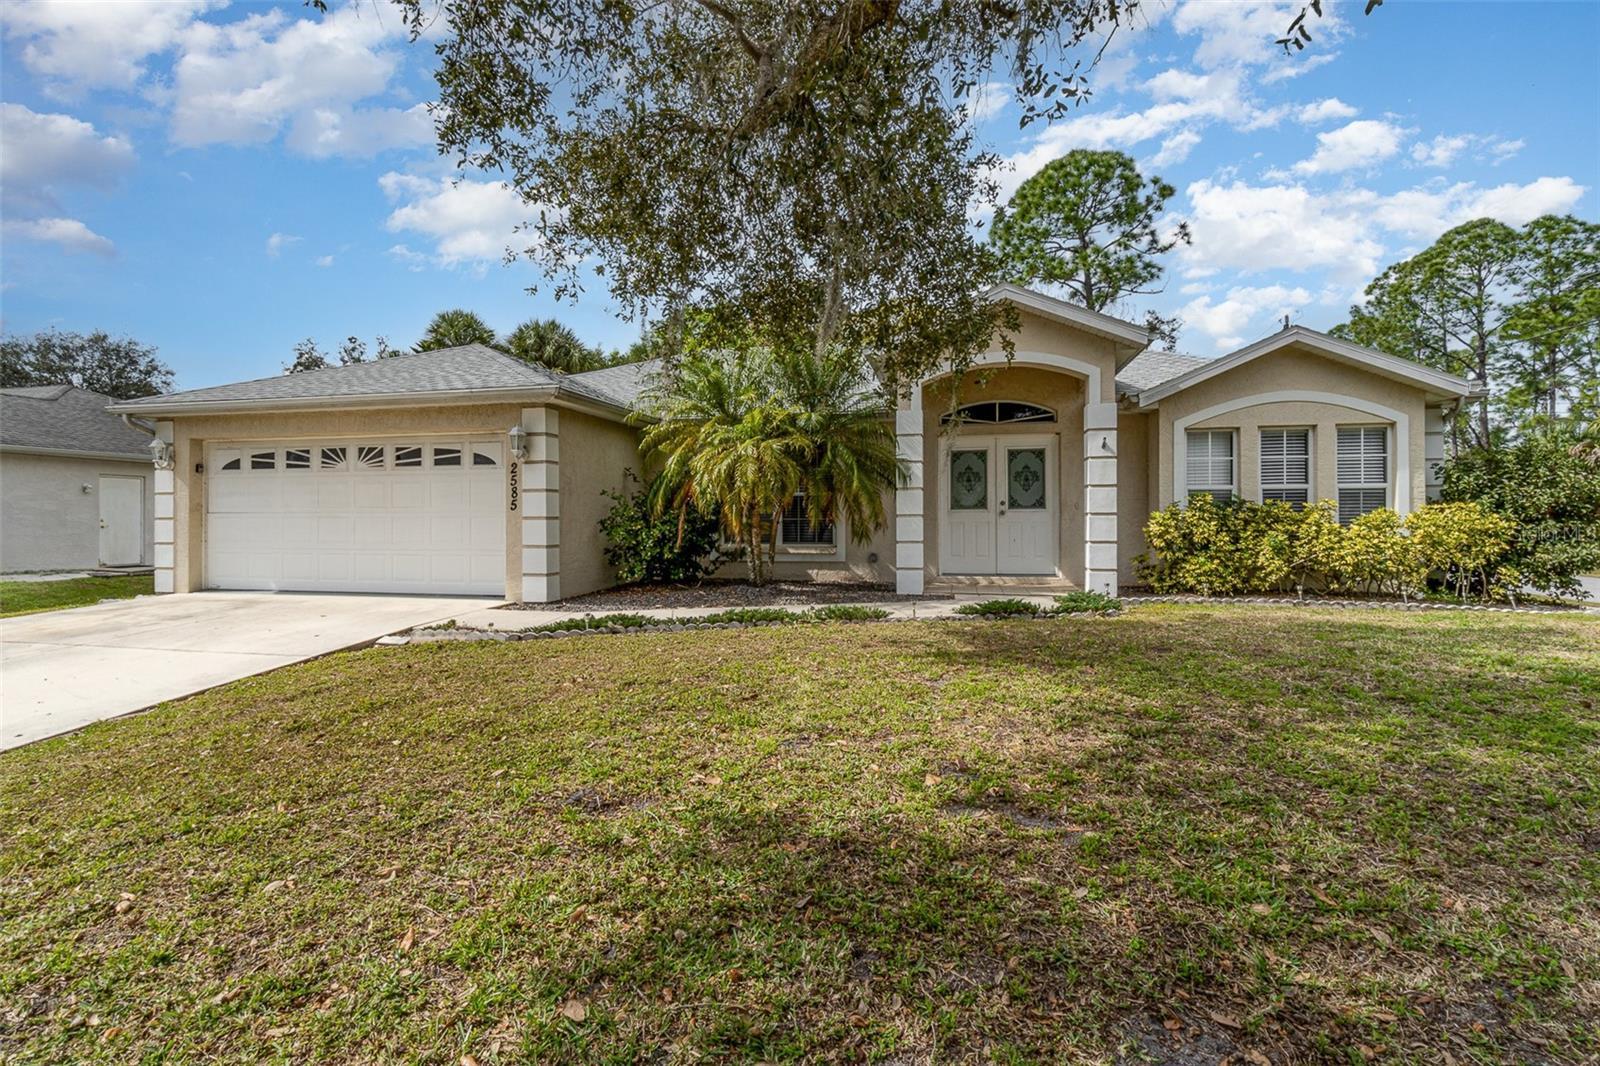 Photo one of 2585 Parrot St North Port FL 34286 | MLS O6175820